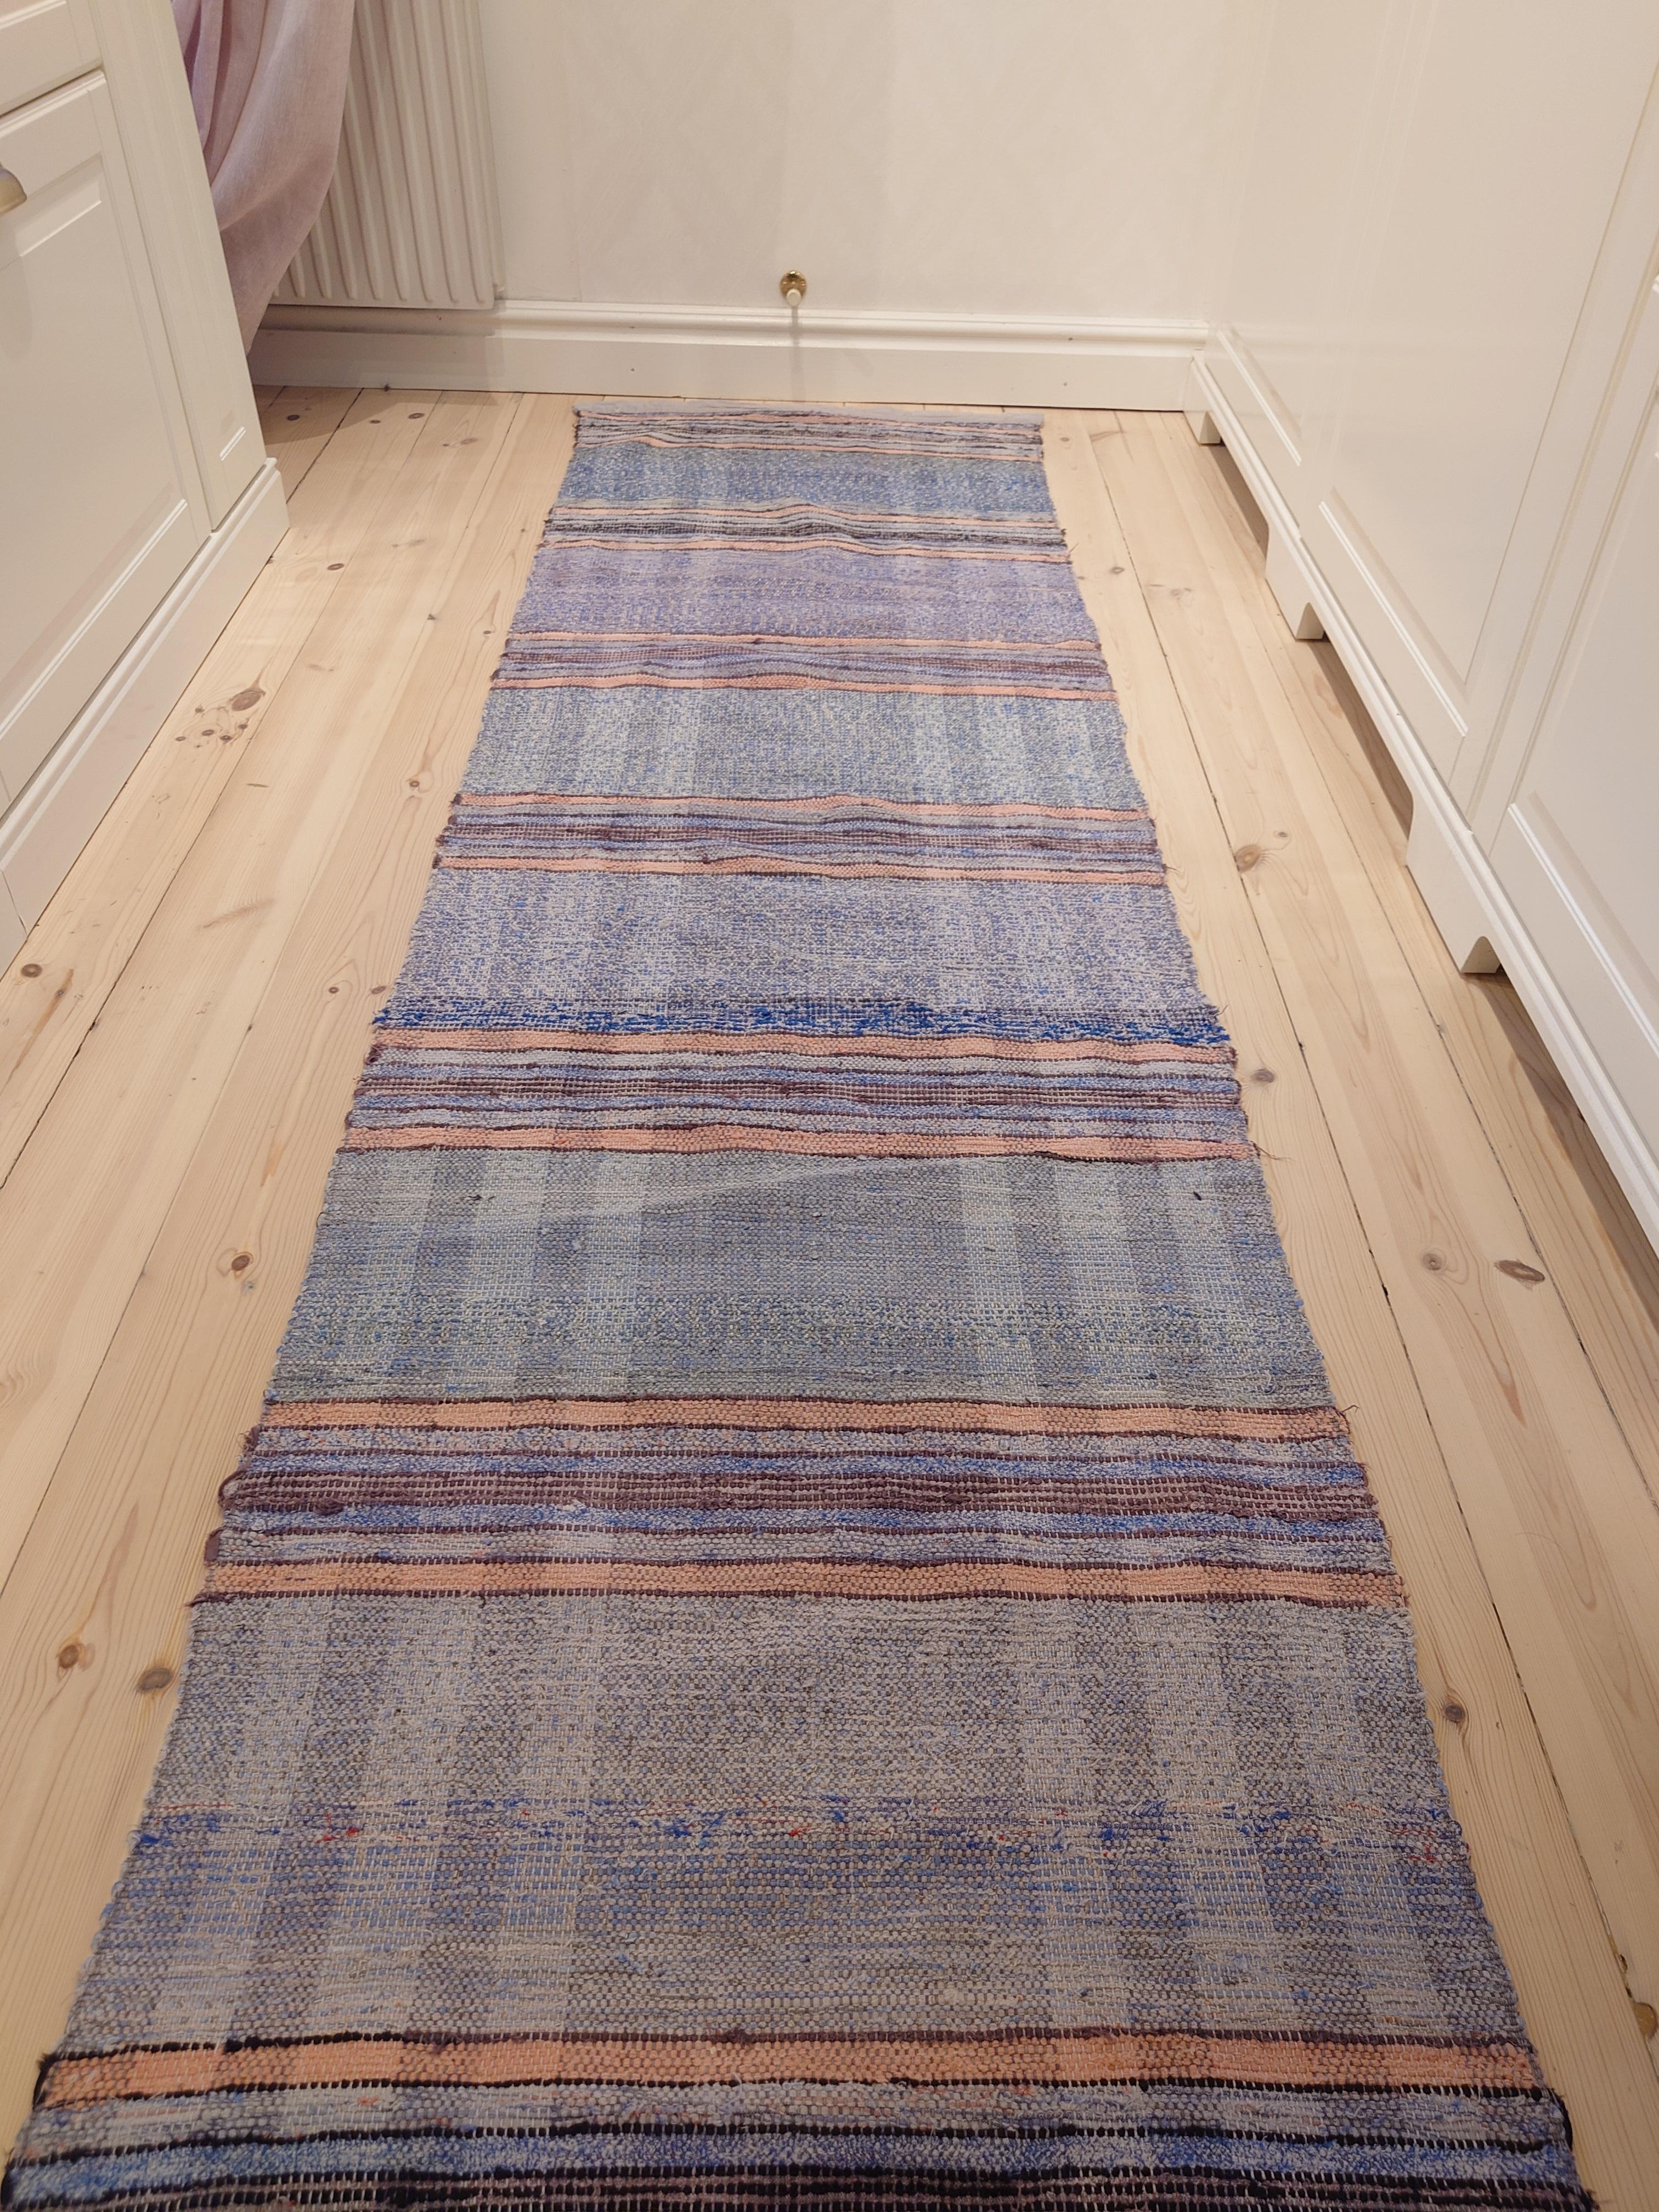 Cotton Beautiful Swedish Rag rug country hand woven For Sale